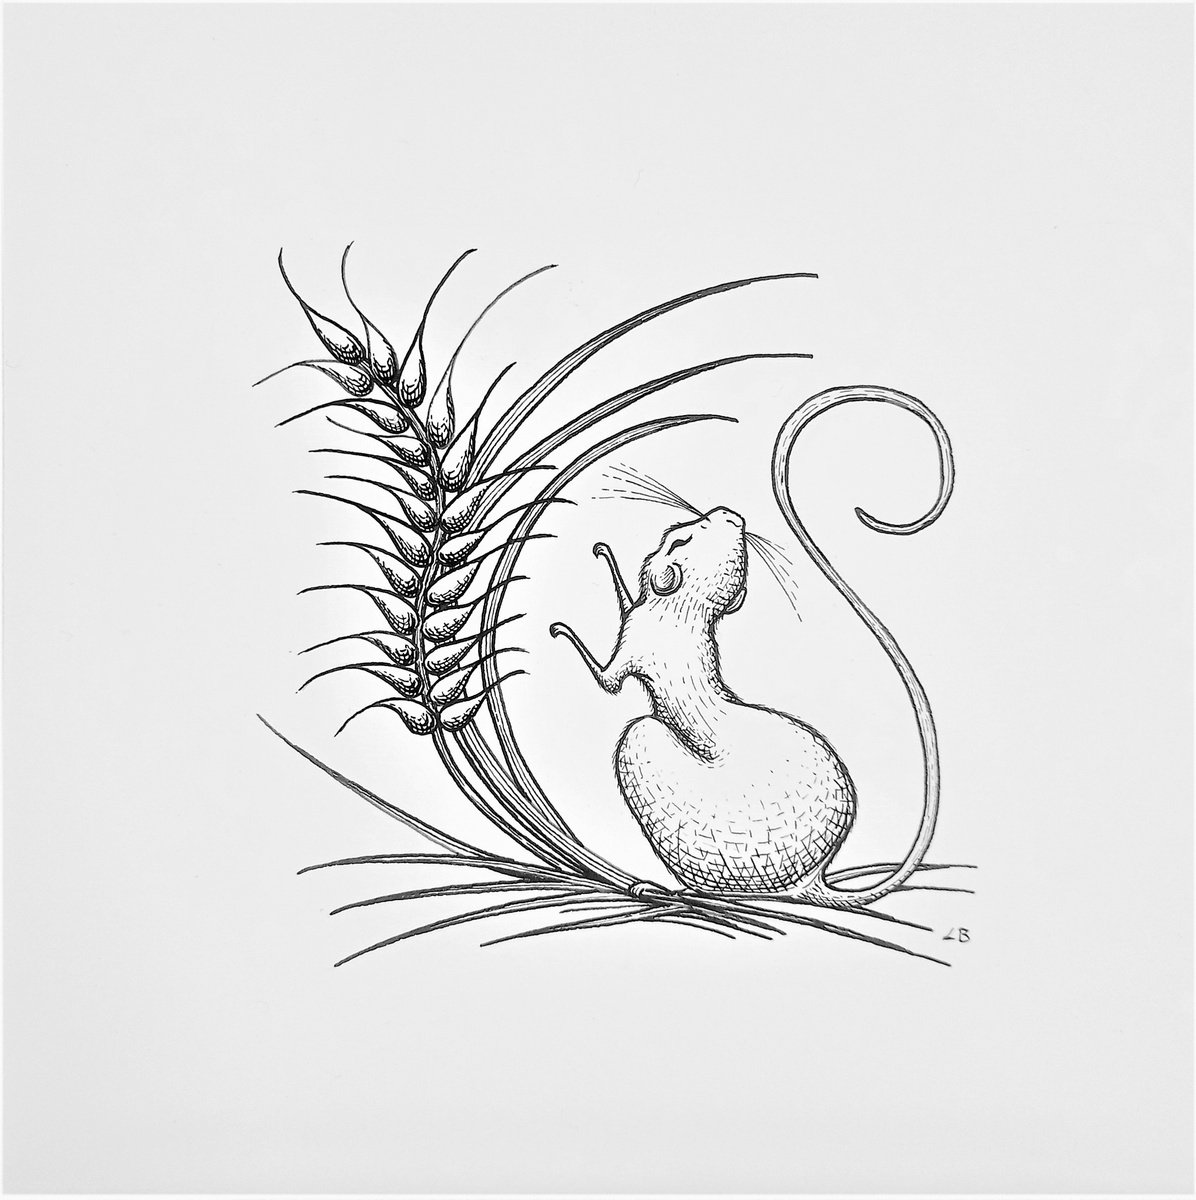 Mouse in the Wheat by Lara Broecke